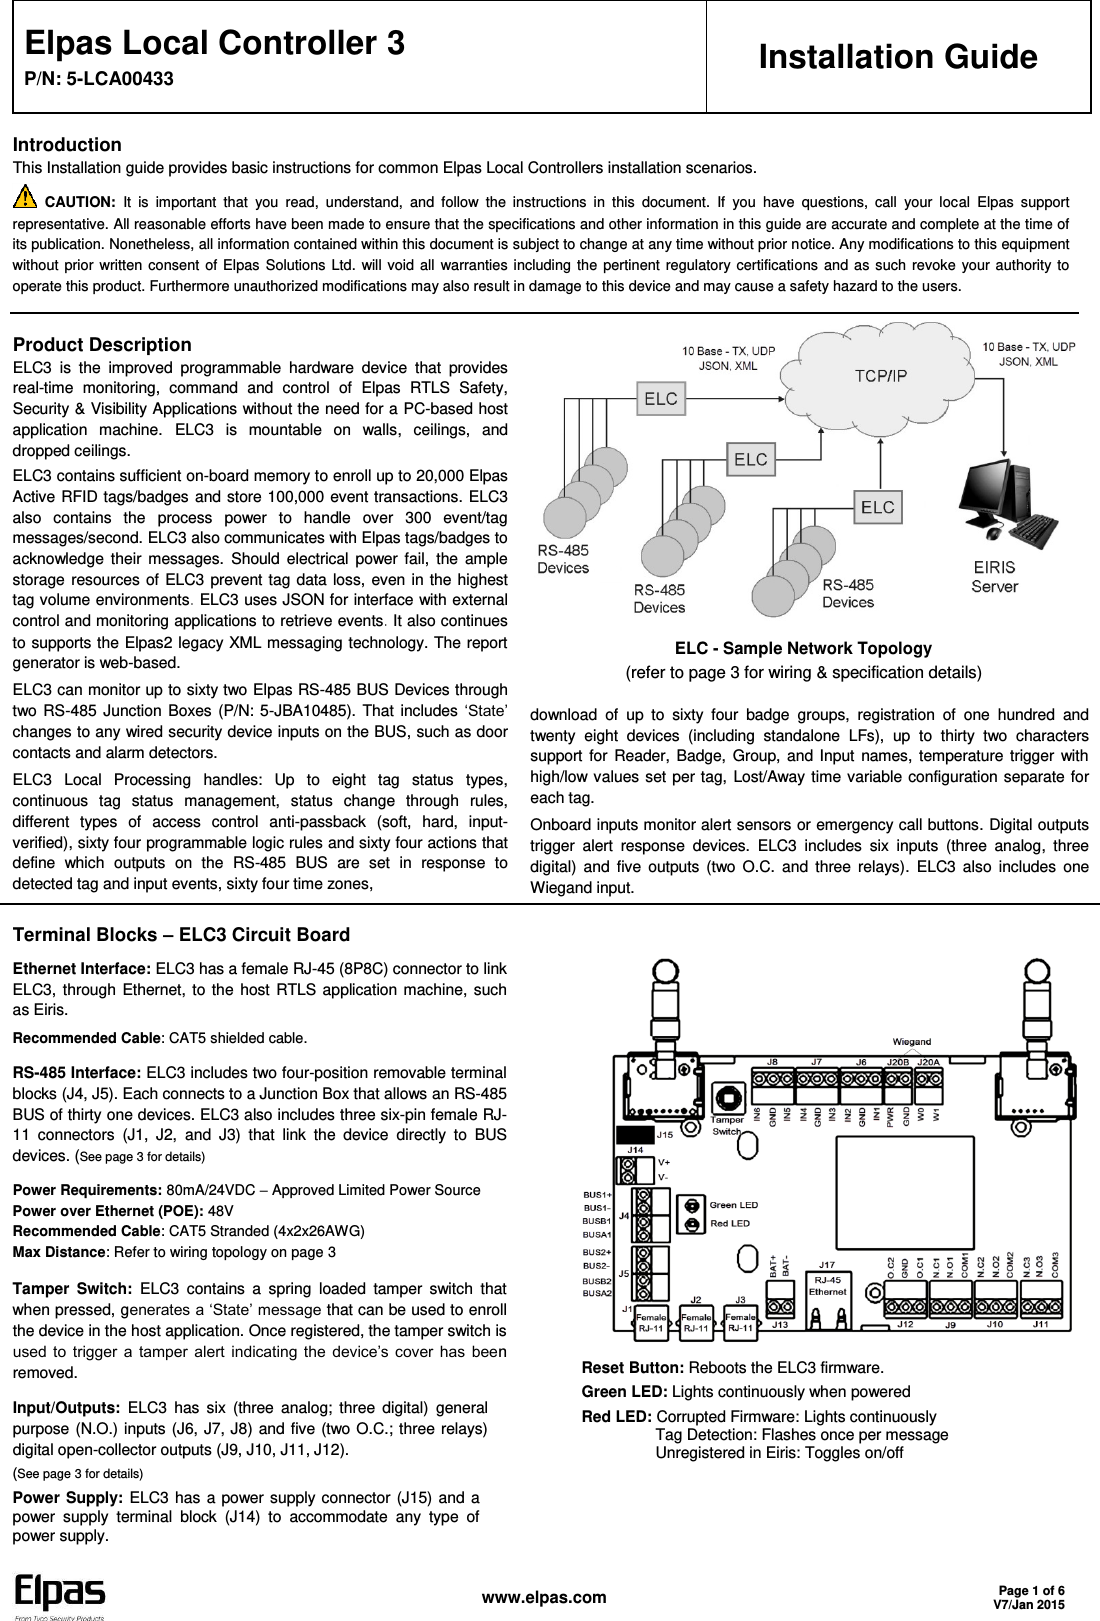   www.elpas.com Page 1 of 6 V7/Jan 2015  Elpas Local Controller 3 P/N: 5-LCA00433 Installation Guide Introduction This Installation guide provides basic instructions for common Elpas Local Controllers installation scenarios.  CAUTION:  It  is  important  that  you  read,  understand,  and  follow  the  instructions  in  this  document.  If  you  have  questions,  call  your  local  Elpas  support representative. All reasonable efforts have been made to ensure that the specifications and other information in this guide are accurate and complete at the time of its publication. Nonetheless, all information contained within this document is subject to change at any time without prior notice. Any modifications to this equipment without  prior  written  consent  of Elpas  Solutions  Ltd.  will  void  all  warranties  including  the  pertinent  regulatory  certifications  and  as  such  revoke  your  authority  to operate this product. Furthermore unauthorized modifications may also result in damage to this device and may cause a safety hazard to the users.  Product Description ELC3  is  the  improved  programmable  hardware  device  that  provides real-time  monitoring,  command  and  control  of  Elpas  RTLS  Safety, Security &amp; Visibility Applications without the need for a PC-based host application  machine. ELC3  is  mountable  on  walls,  ceilings,  and dropped ceilings. ELC3 contains sufficient on-board memory to enroll up to 20,000 Elpas Active RFID tags/badges and store 100,000 event transactions. ELC3 also  contains  the  process  power  to  handle  over  300  event/tag messages/second. ELC3 also communicates with Elpas tags/badges to acknowledge  their  messages.  Should  electrical  power  fail,  the  ample storage resources of ELC3  prevent tag  data loss, even  in the highest tag volume environments. ELC3 uses JSON for interface with external control and monitoring applications to retrieve events. It also continues to supports the Elpas2 legacy XML messaging technology. The report generator is web-based. ELC3 can monitor up to sixty two Elpas RS-485 BUS Devices through two RS-485  Junction  Boxes  (P/N: 5-JBA10485).  That  includes ‘State’ changes to any wired security device inputs on the BUS, such as door contacts and alarm detectors. ELC3  Local  Processing  handles:  Up  to  eight  tag  status  types, continuous  tag  status  management,  status  change  through  rules, different  types  of  access  control  anti-passback  (soft,  hard,  input-verified), sixty four programmable logic rules and sixty four actions that define  which  outputs  on  the  RS-485  BUS  are  set  in  response  to detected tag and input events, sixty four time zones,    ELC - Sample Network Topology (refer to page 3 for wiring &amp; specification details) download  of  up  to  sixty  four  badge  groups,  registration  of  one  hundred  and twenty  eight  devices  (including  standalone  LFs),  up  to  thirty  two  characters support  for  Reader,  Badge,  Group,  and  Input  names, temperature  trigger  with high/low values set per  tag,  Lost/Away time variable configuration separate for each tag. Onboard inputs monitor alert sensors or emergency call buttons. Digital outputs trigger  alert  response  devices.  ELC3  includes  six  inputs  (three  analog,  three digital)  and  five  outputs  (two  O.C.  and  three  relays).  ELC3  also  includes  one Wiegand input.  Terminal Blocks – ELC3 Circuit Board Ethernet Interface: ELC3 has a female RJ-45 (8P8C) connector to link ELC3,  through  Ethernet,  to  the  host  RTLS application machine,  such as Eiris. Recommended Cable: CAT5 shielded cable. RS-485 Interface: ELC3 includes two four-position removable terminal blocks (J4, J5). Each connects to a Junction Box that allows an RS-485 BUS of thirty one devices. ELC3 also includes three six-pin female RJ-11  connectors  (J1,  J2,  and  J3)  that  link  the  device  directly  to  BUS devices. (See page 3 for details) Power Requirements: 80mA/24VDC – Approved Limited Power Source Power over Ethernet (POE): 48V Recommended Cable: CAT5 Stranded (4x2x26AWG) Max Distance: Refer to wiring topology on page 3 Tamper  Switch: ELC3  contains  a  spring  loaded  tamper  switch  that when pressed, generates a ‘State’ message that can be used to enroll the device in the host application. Once registered, the tamper switch is used  to  trigger  a  tamper  alert  indicating the  device’s  cover  has  been removed. Input/Outputs: ELC3  has  six  (three  analog;  three  digital)  general purpose (N.O.) inputs (J6, J7, J8)  and five (two O.C.; three relays) digital open-collector outputs (J9, J10, J11, J12). (See page 3 for details) Power Supply: ELC3  has  a power supply connector (J15) and  a power  supply  terminal  block  (J14)  to  accommodate  any  type  of power supply.   Reset Button: Reboots the ELC3 firmware. Green LED: Lights continuously when powered Red LED: Corrupted Firmware: Lights continuously                  Tag Detection: Flashes once per message                   Unregistered in Eiris: Toggles on/off 